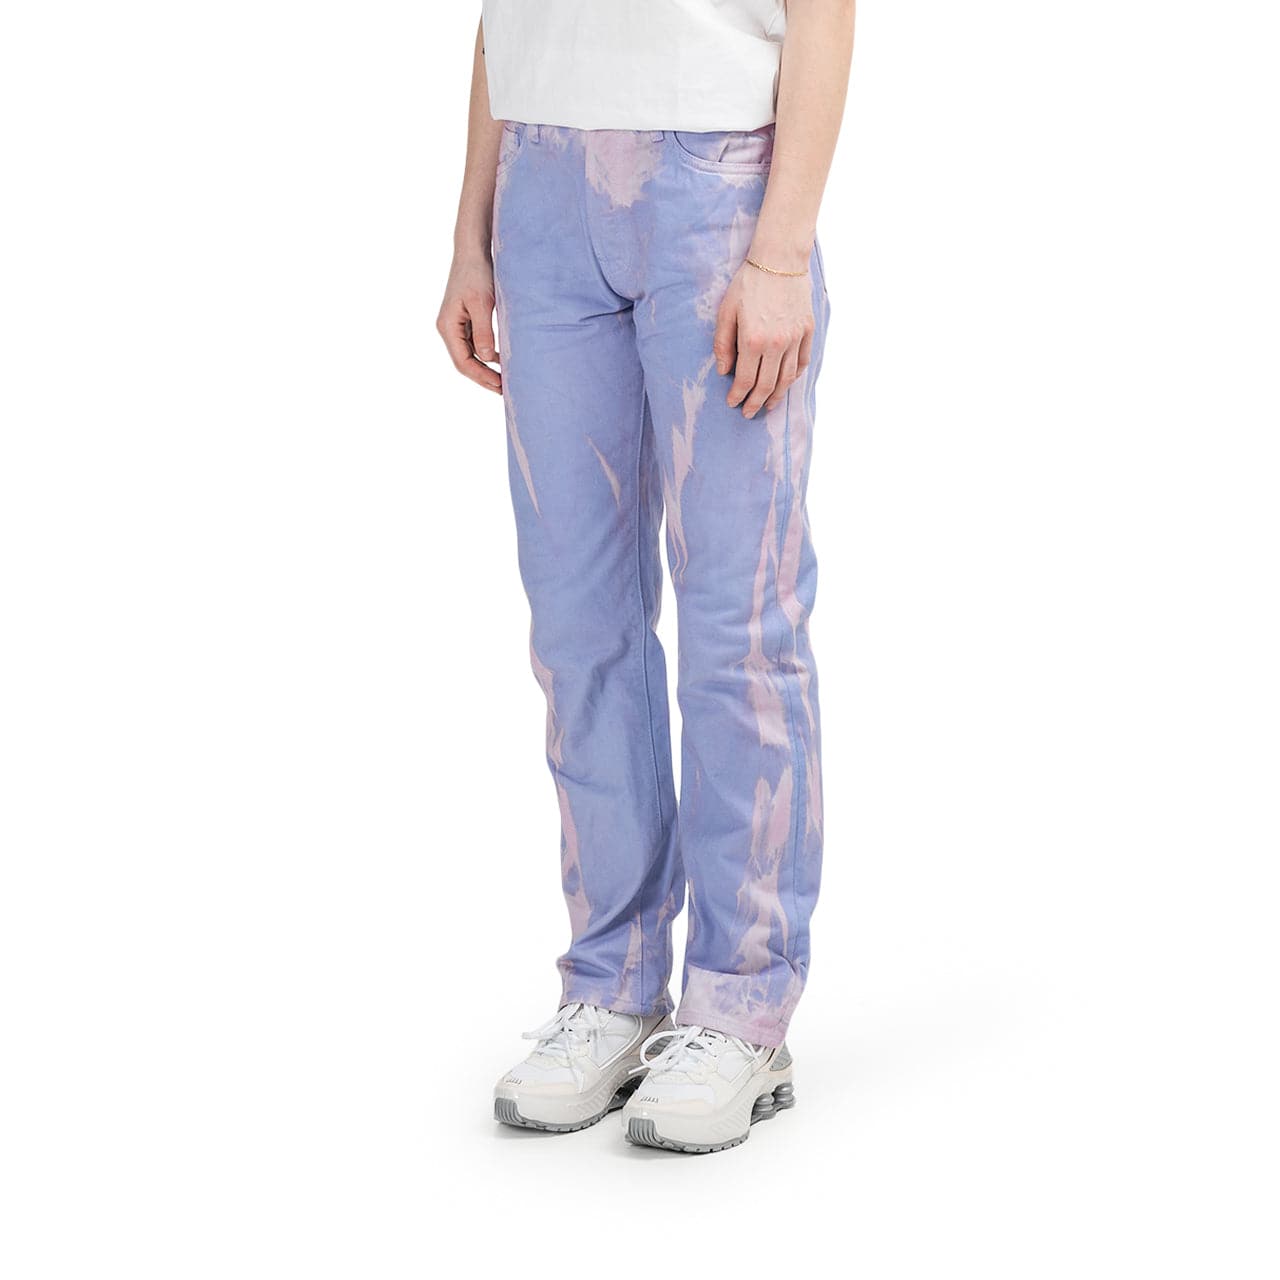 Aries MLP Dyed Lilly Jeans (Lila)  - Allike Store